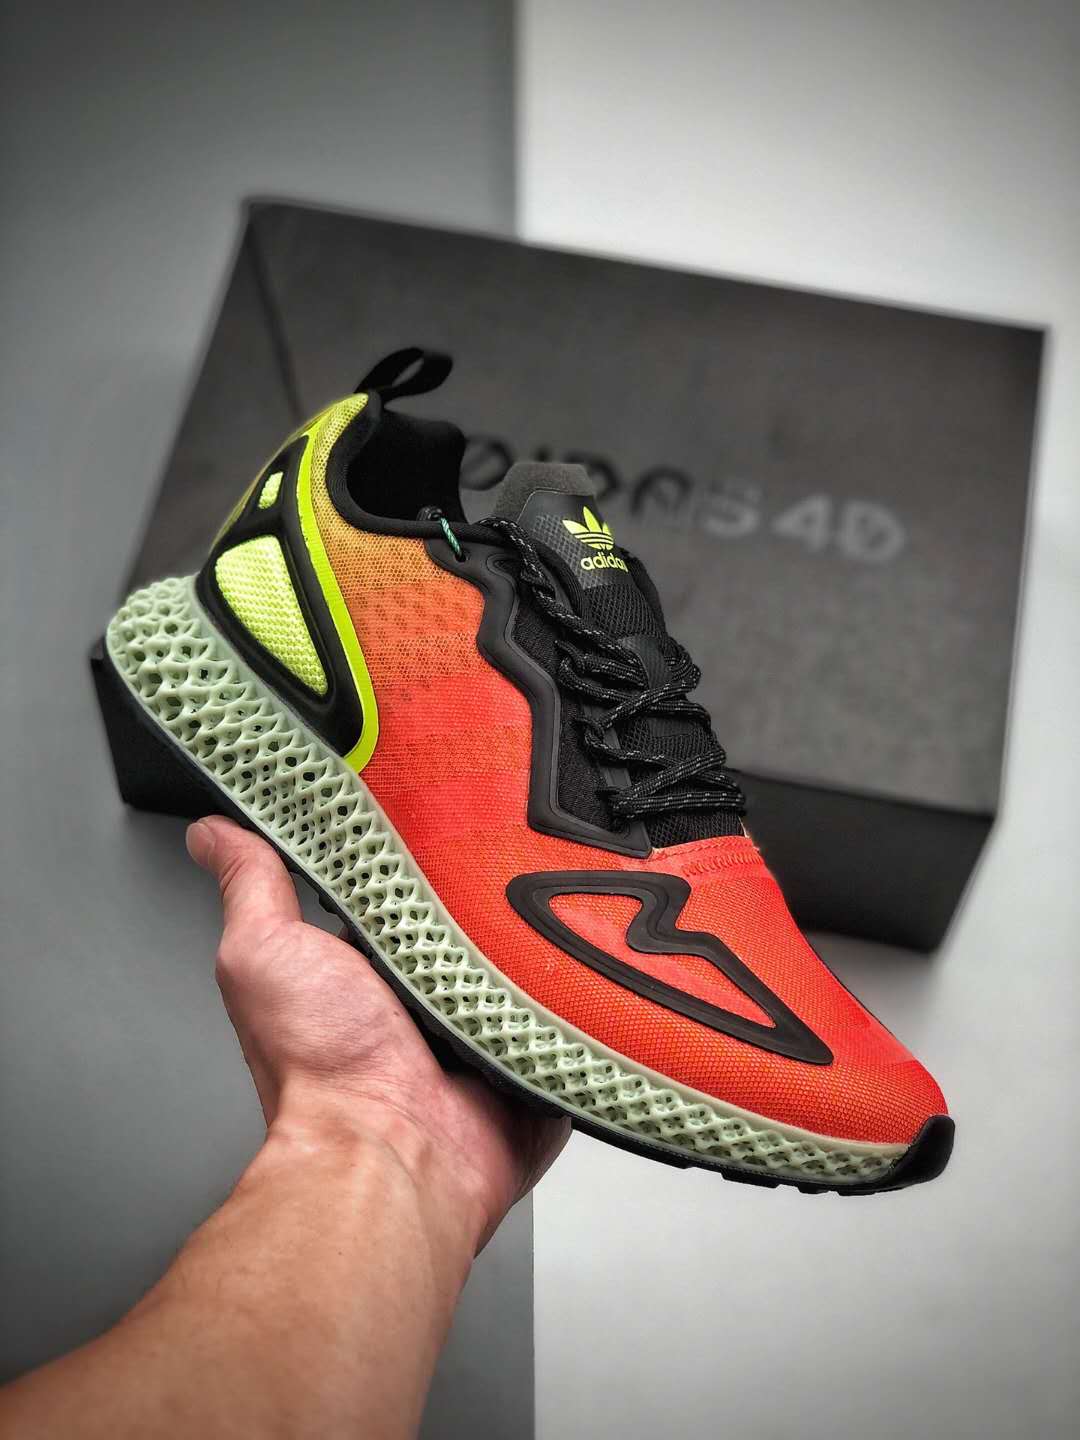 Adidas ZX 2K 4D Heatmap FV9028 - Futuristic Design for Unmatched Style